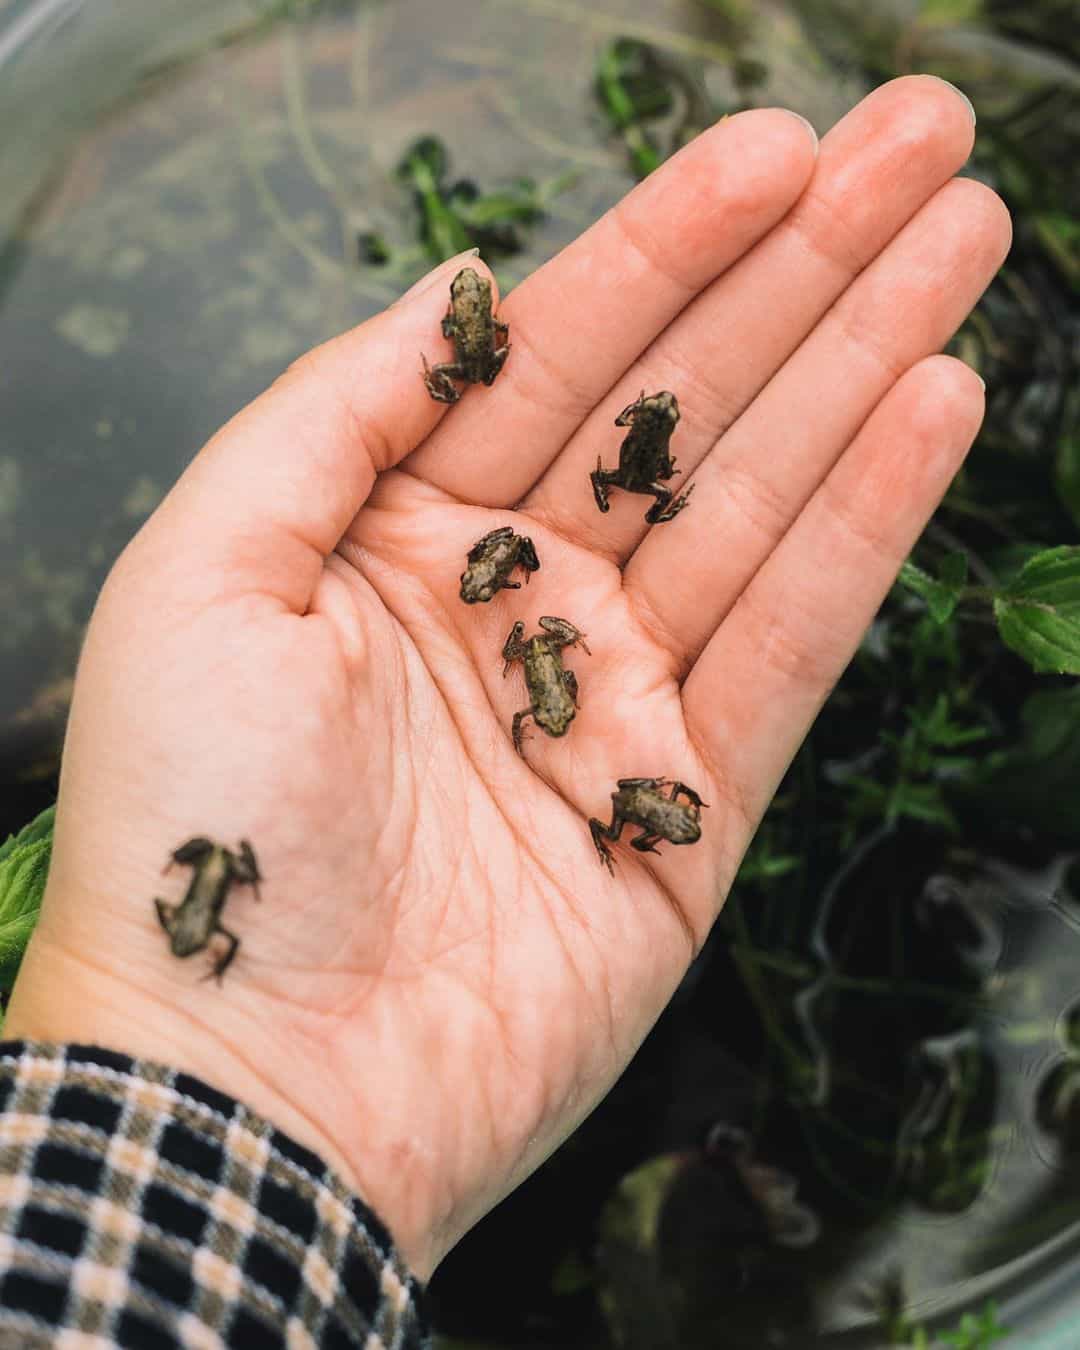 Baby Frogs as Pets